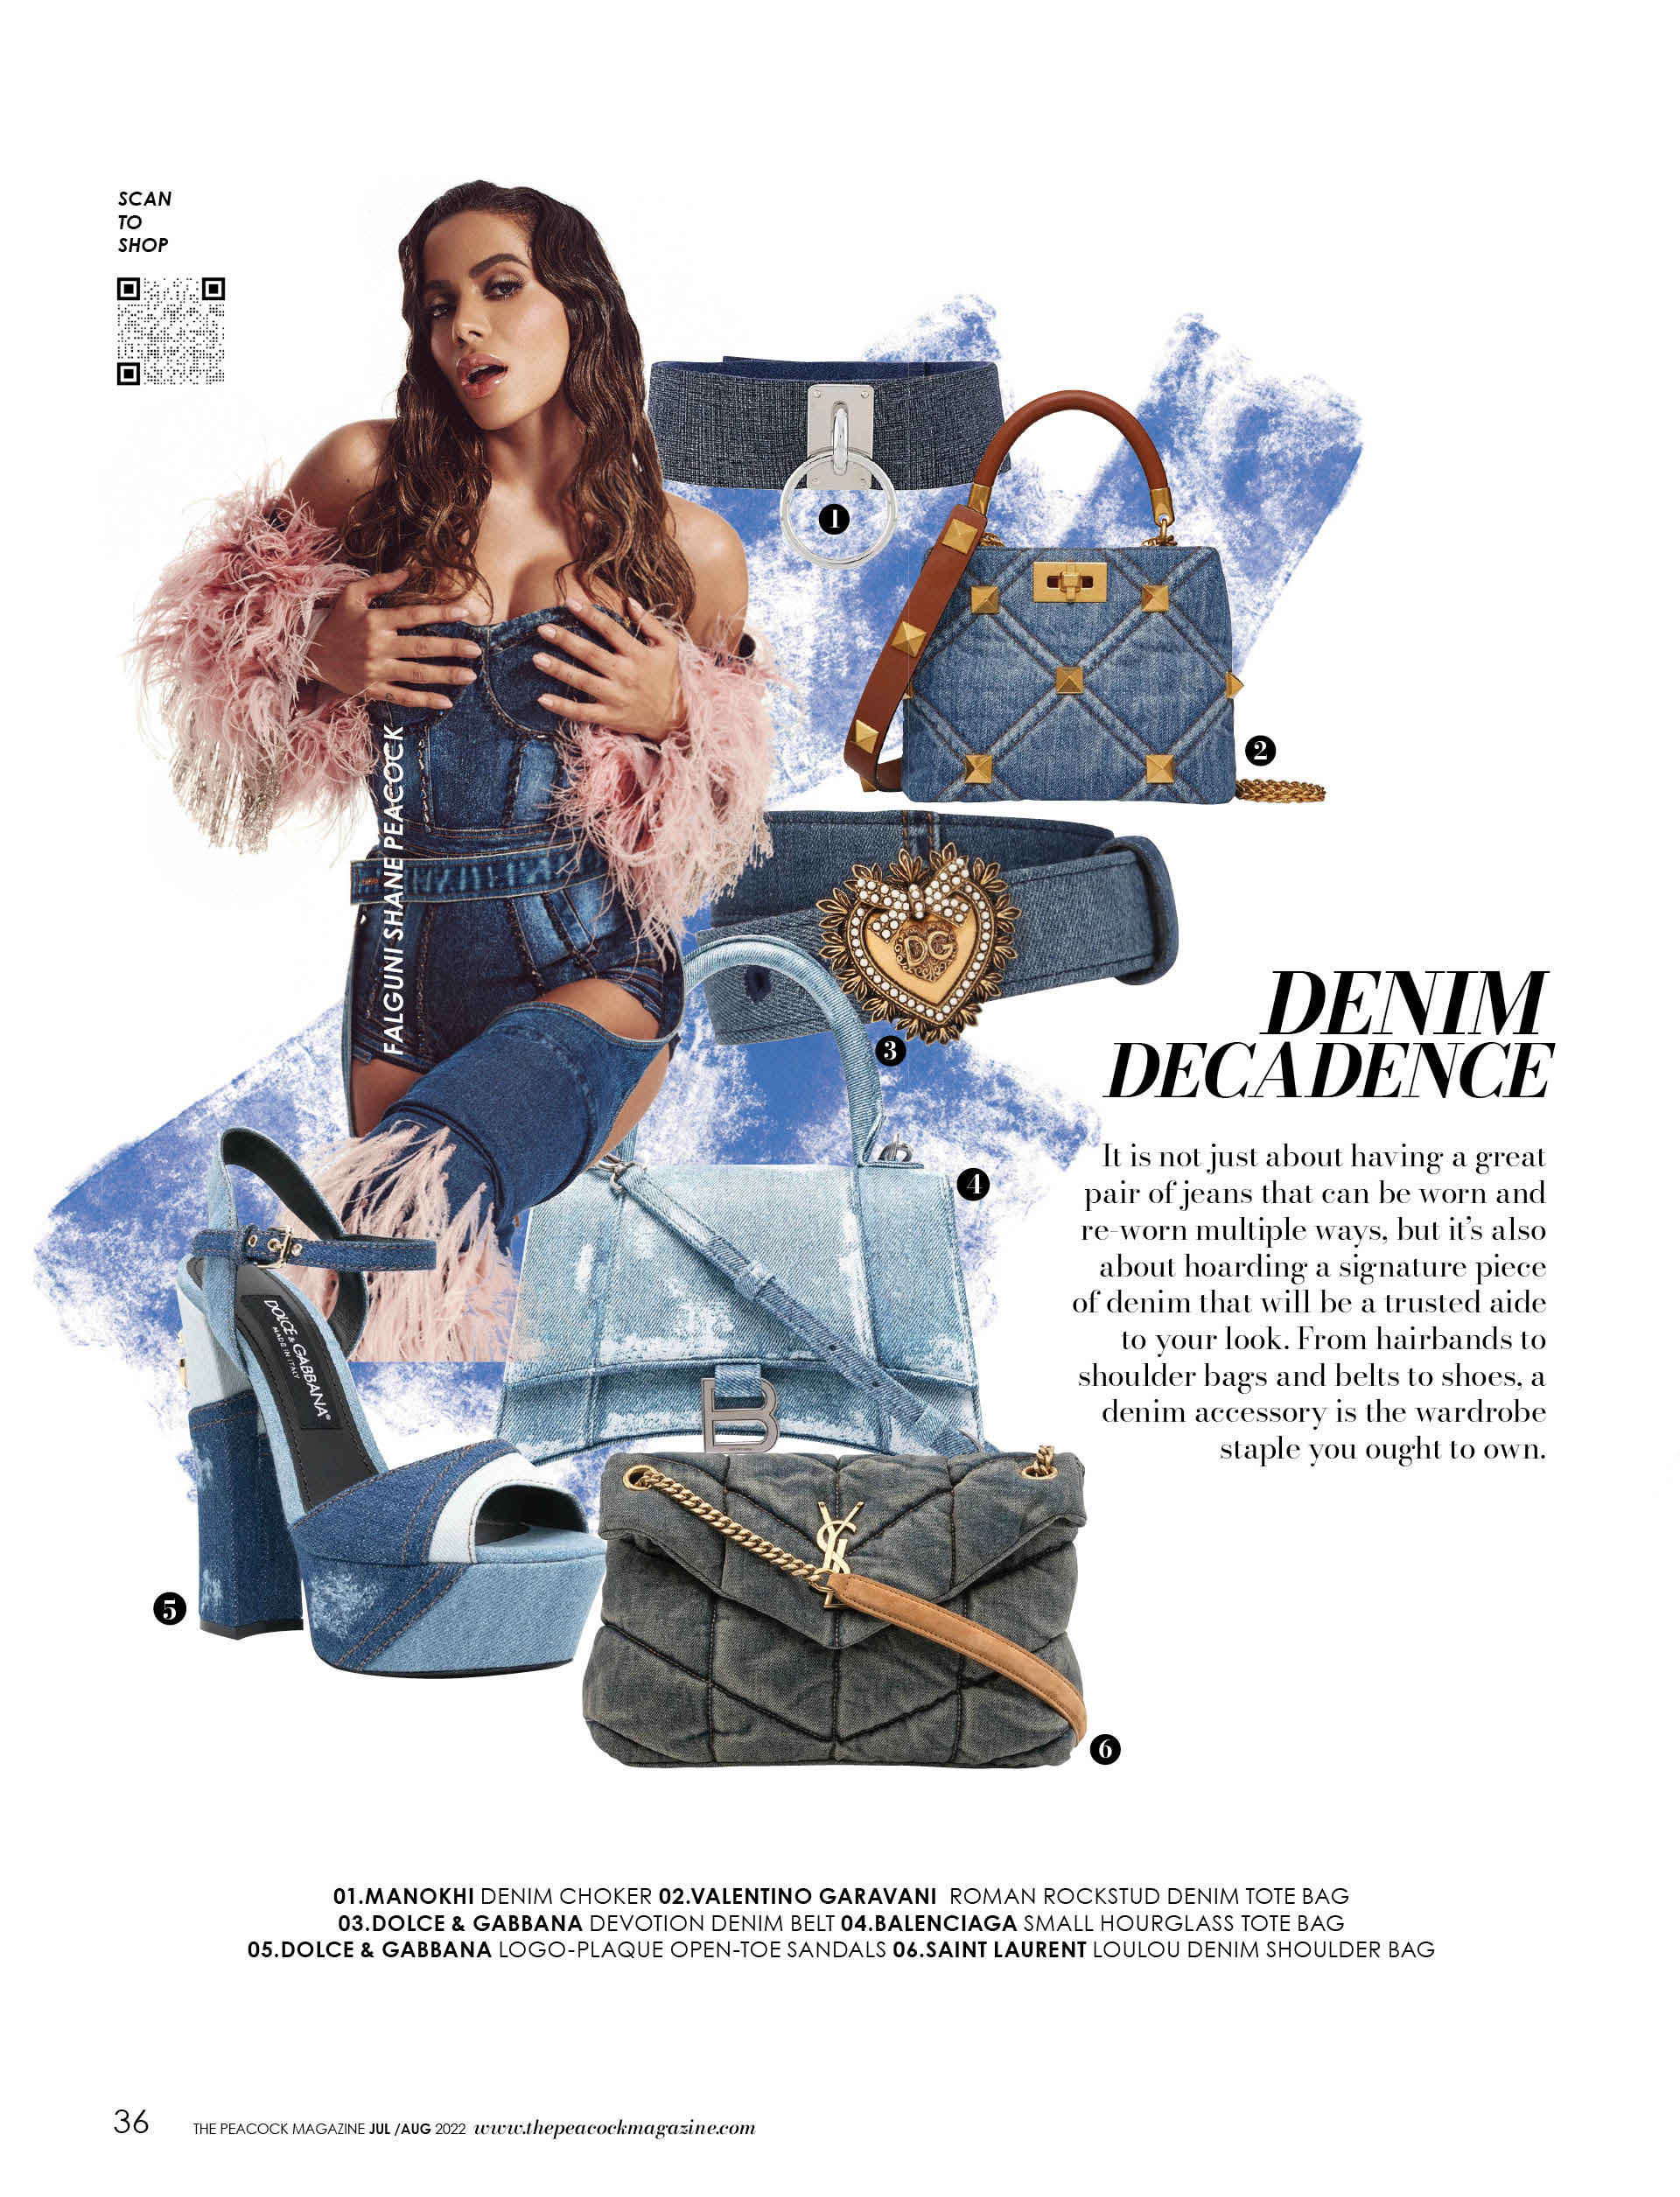 Denim Decadence - It is not just about having a great pair of jeans